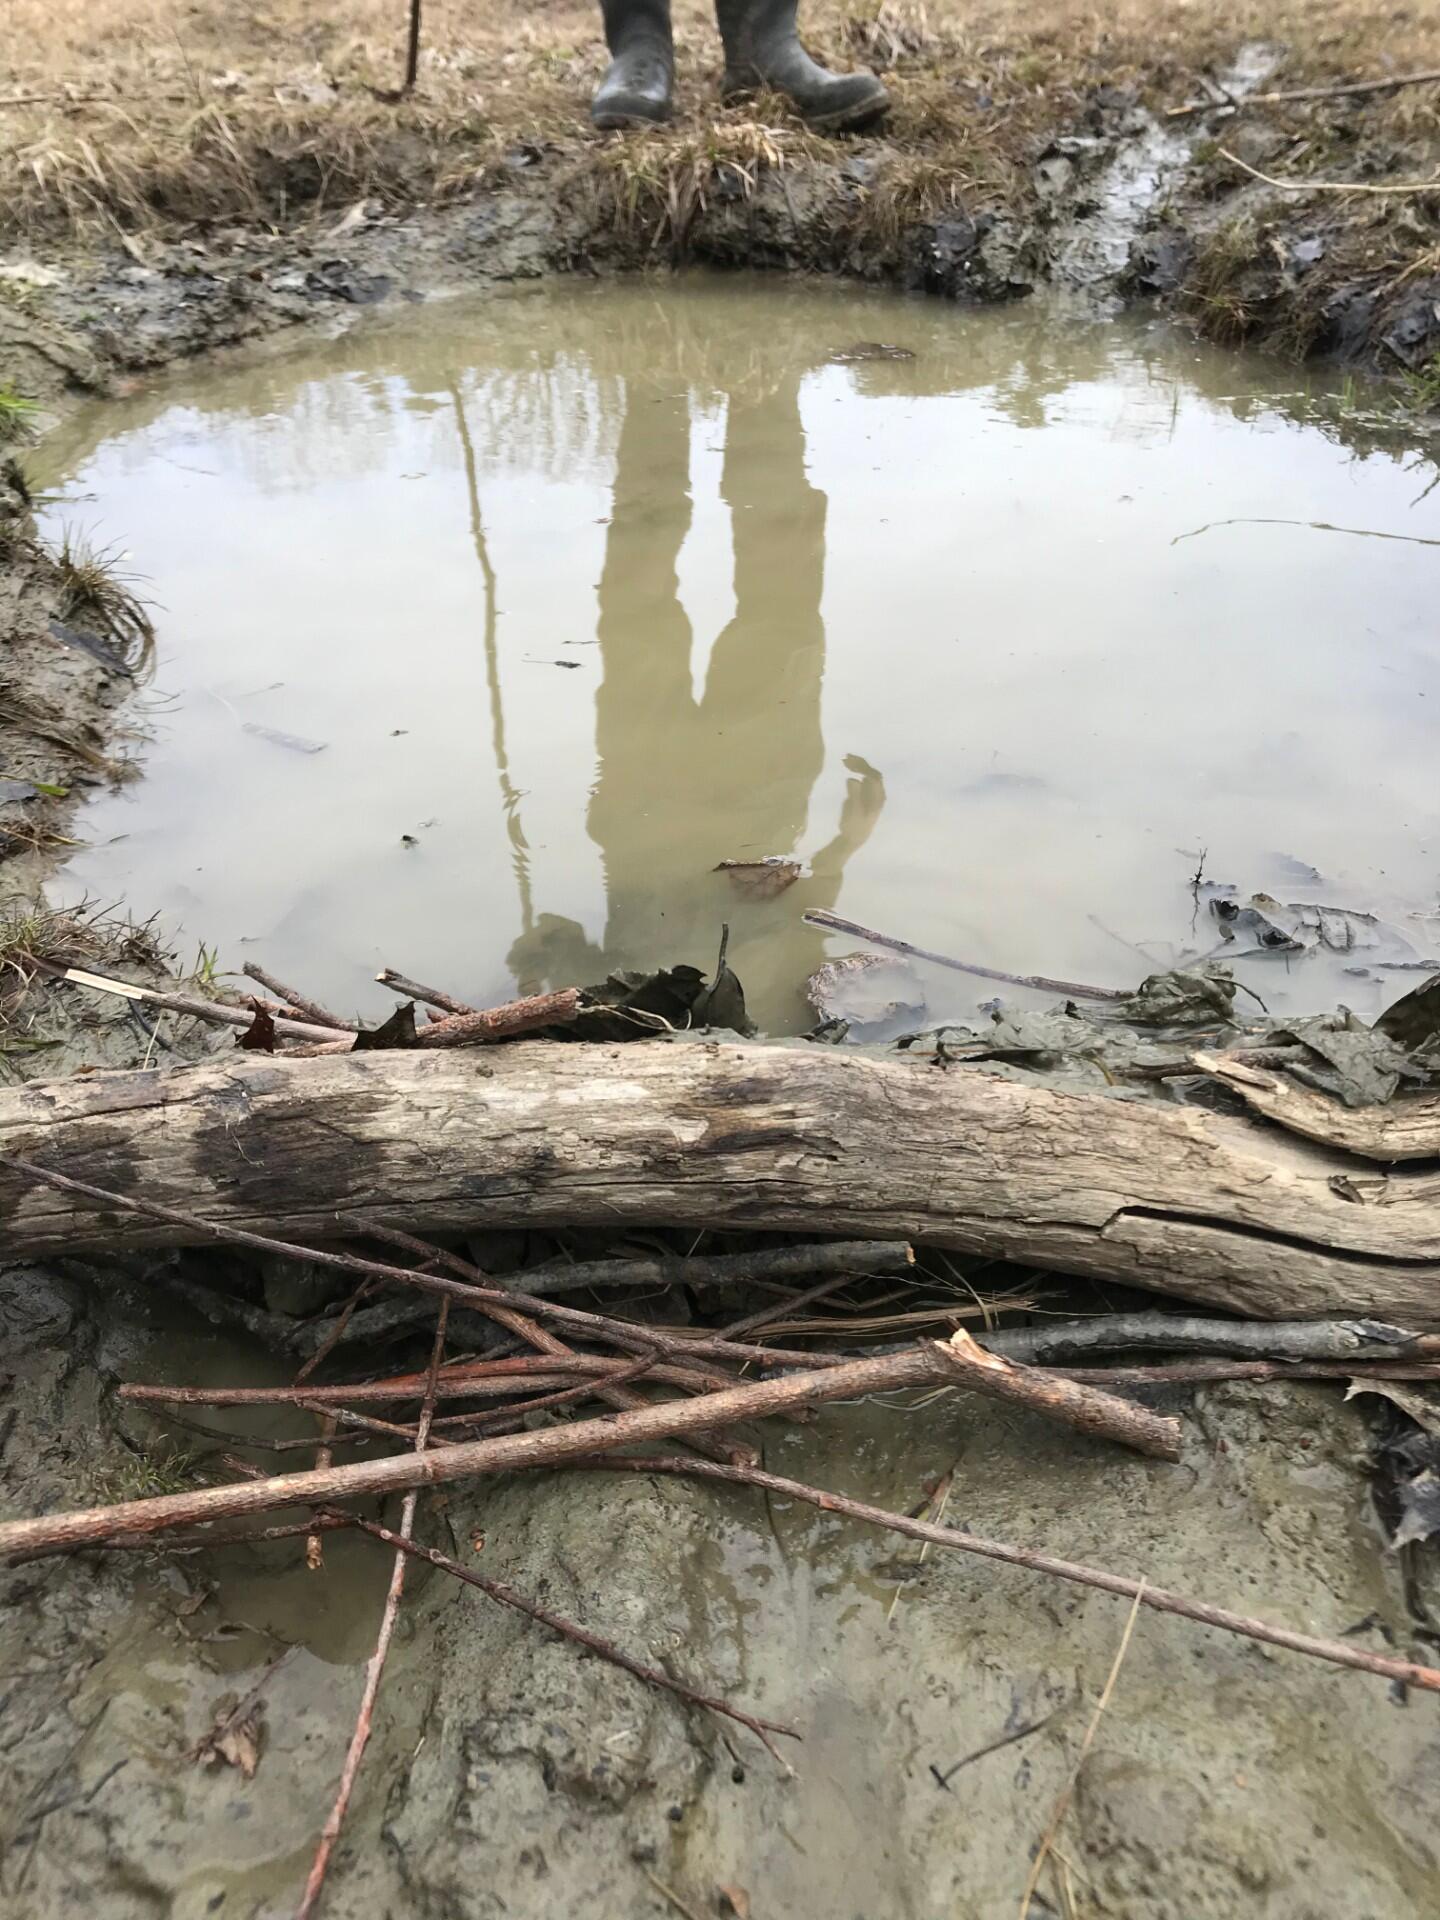 A person wearing black rubber boots stands behind a muddy puddle. A small, constructed dam of sticks and leaves is in the foreground. A reflection of the person is visible in the puddle.  